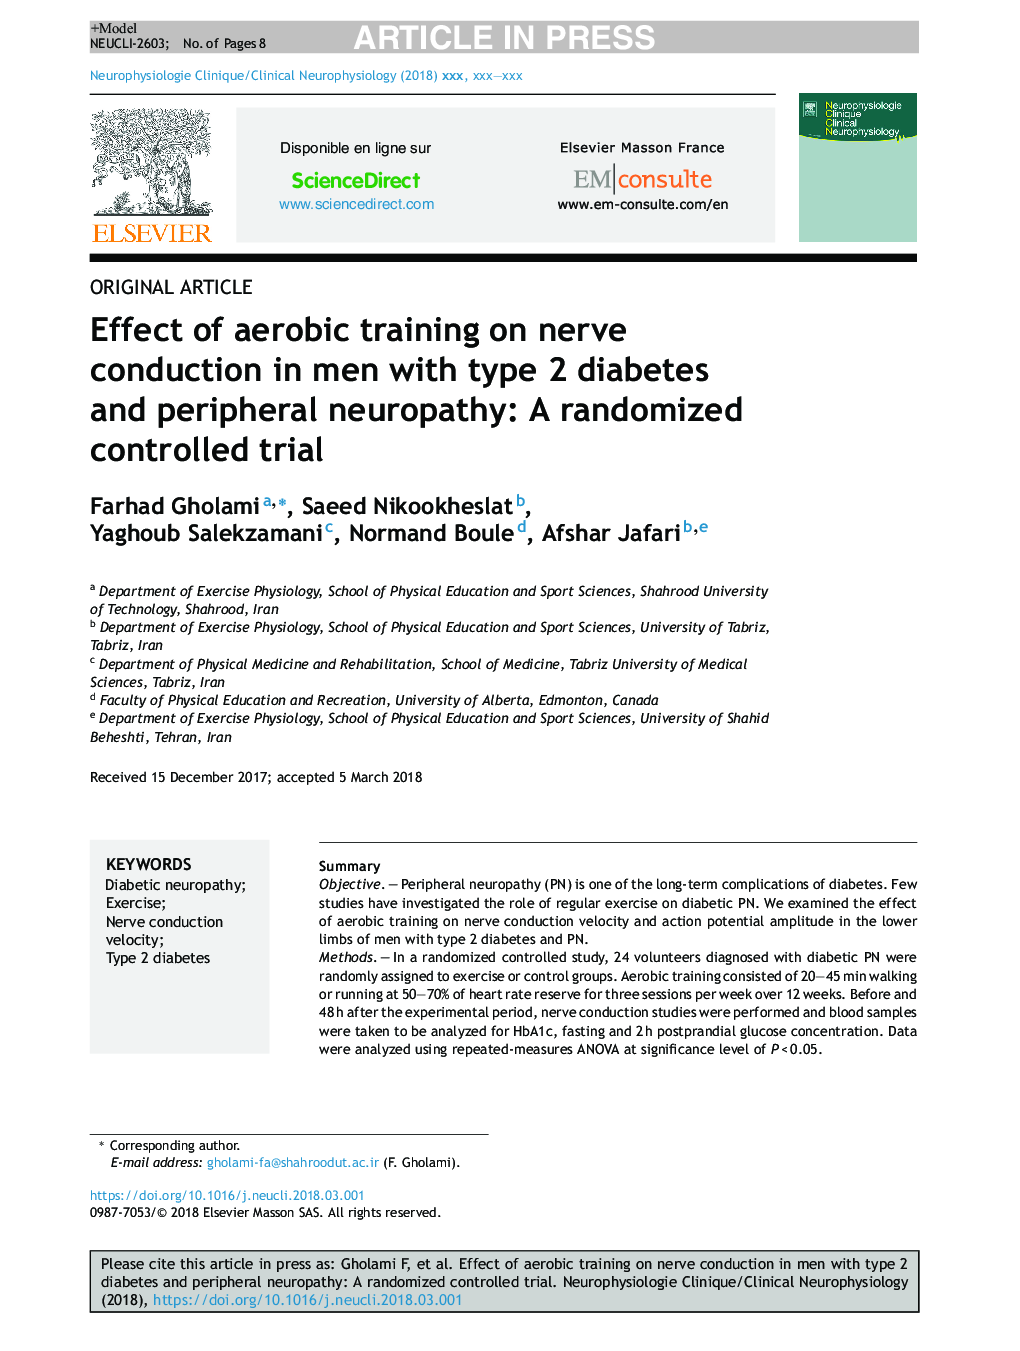 Effect of aerobic training on nerve conduction in men with type 2 diabetes and peripheral neuropathy: A randomized controlled trial